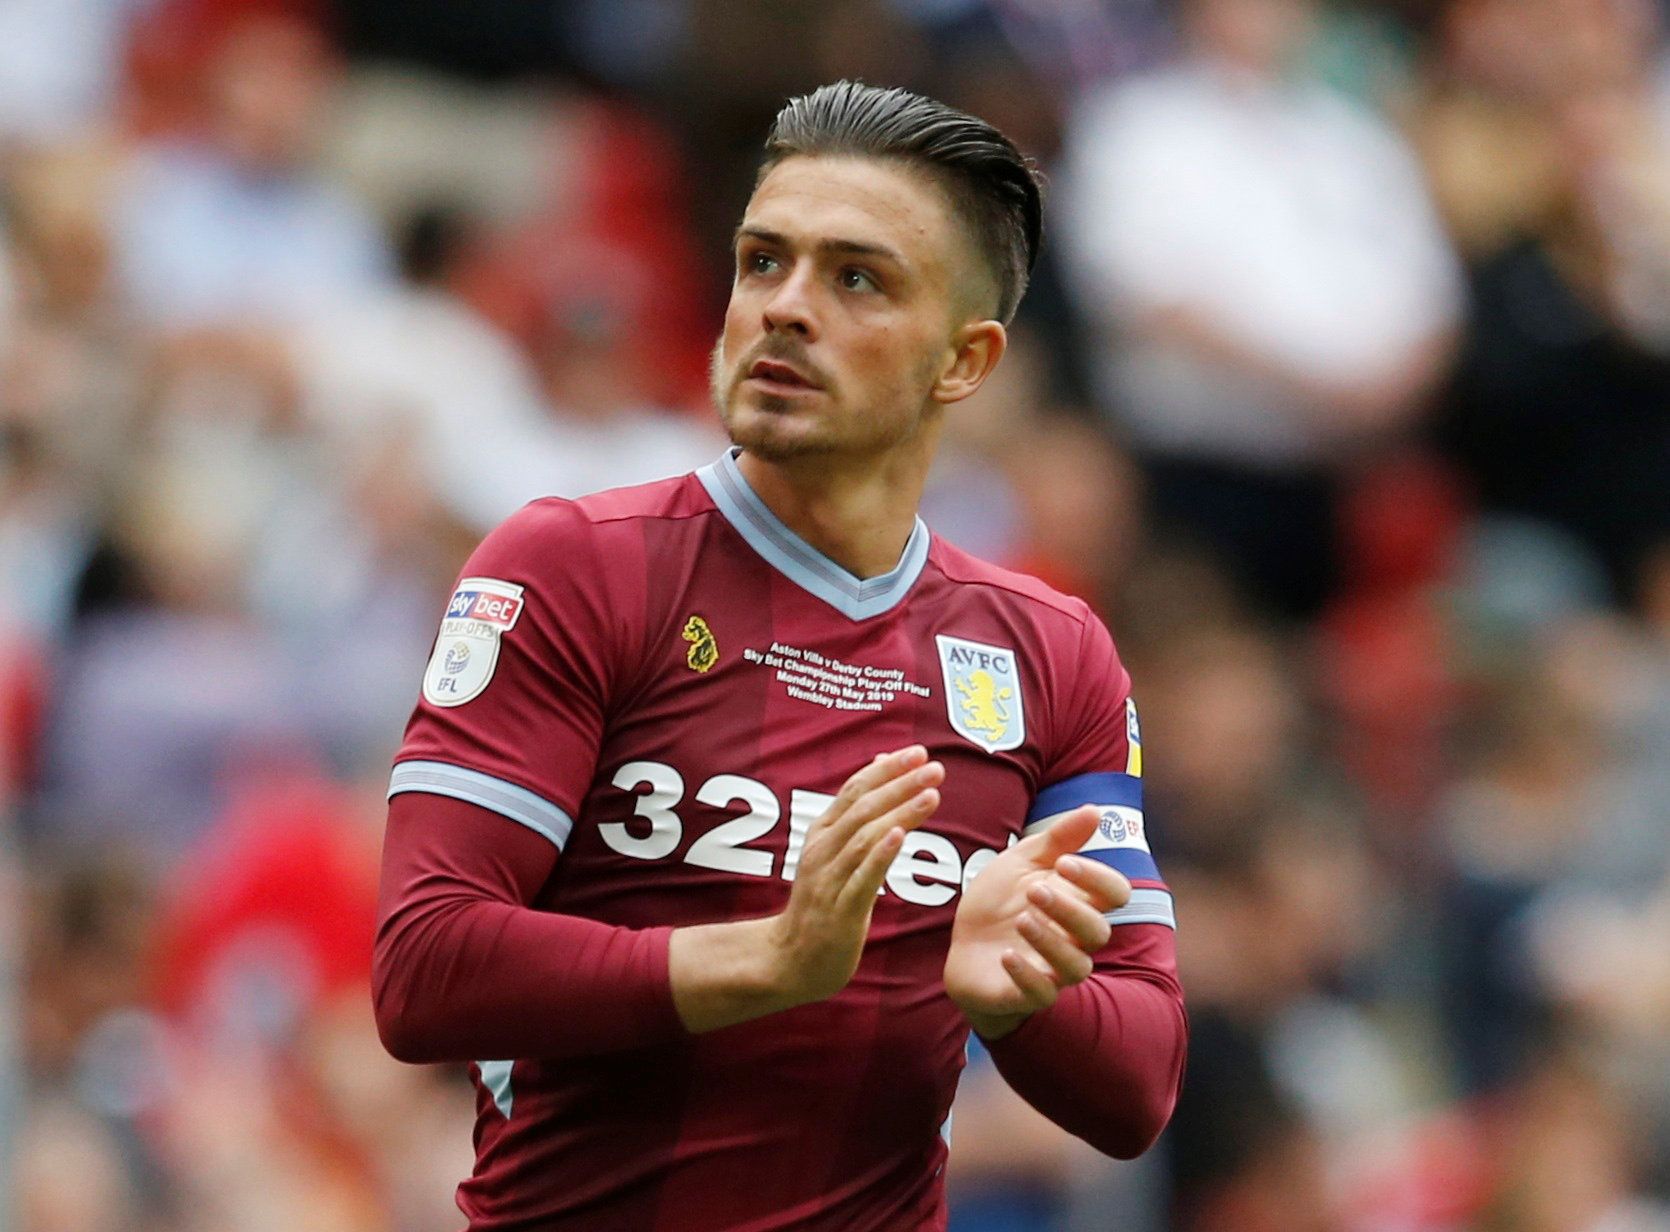 Soccer Football - Championship Playoff Final - Aston Villa v Derby County - Wembley Stadium, London, Britain - May 27, 2019  Aston Villa's Jack Grealish applauds the fans before the match  Action Images via Reuters/Ed Sykes